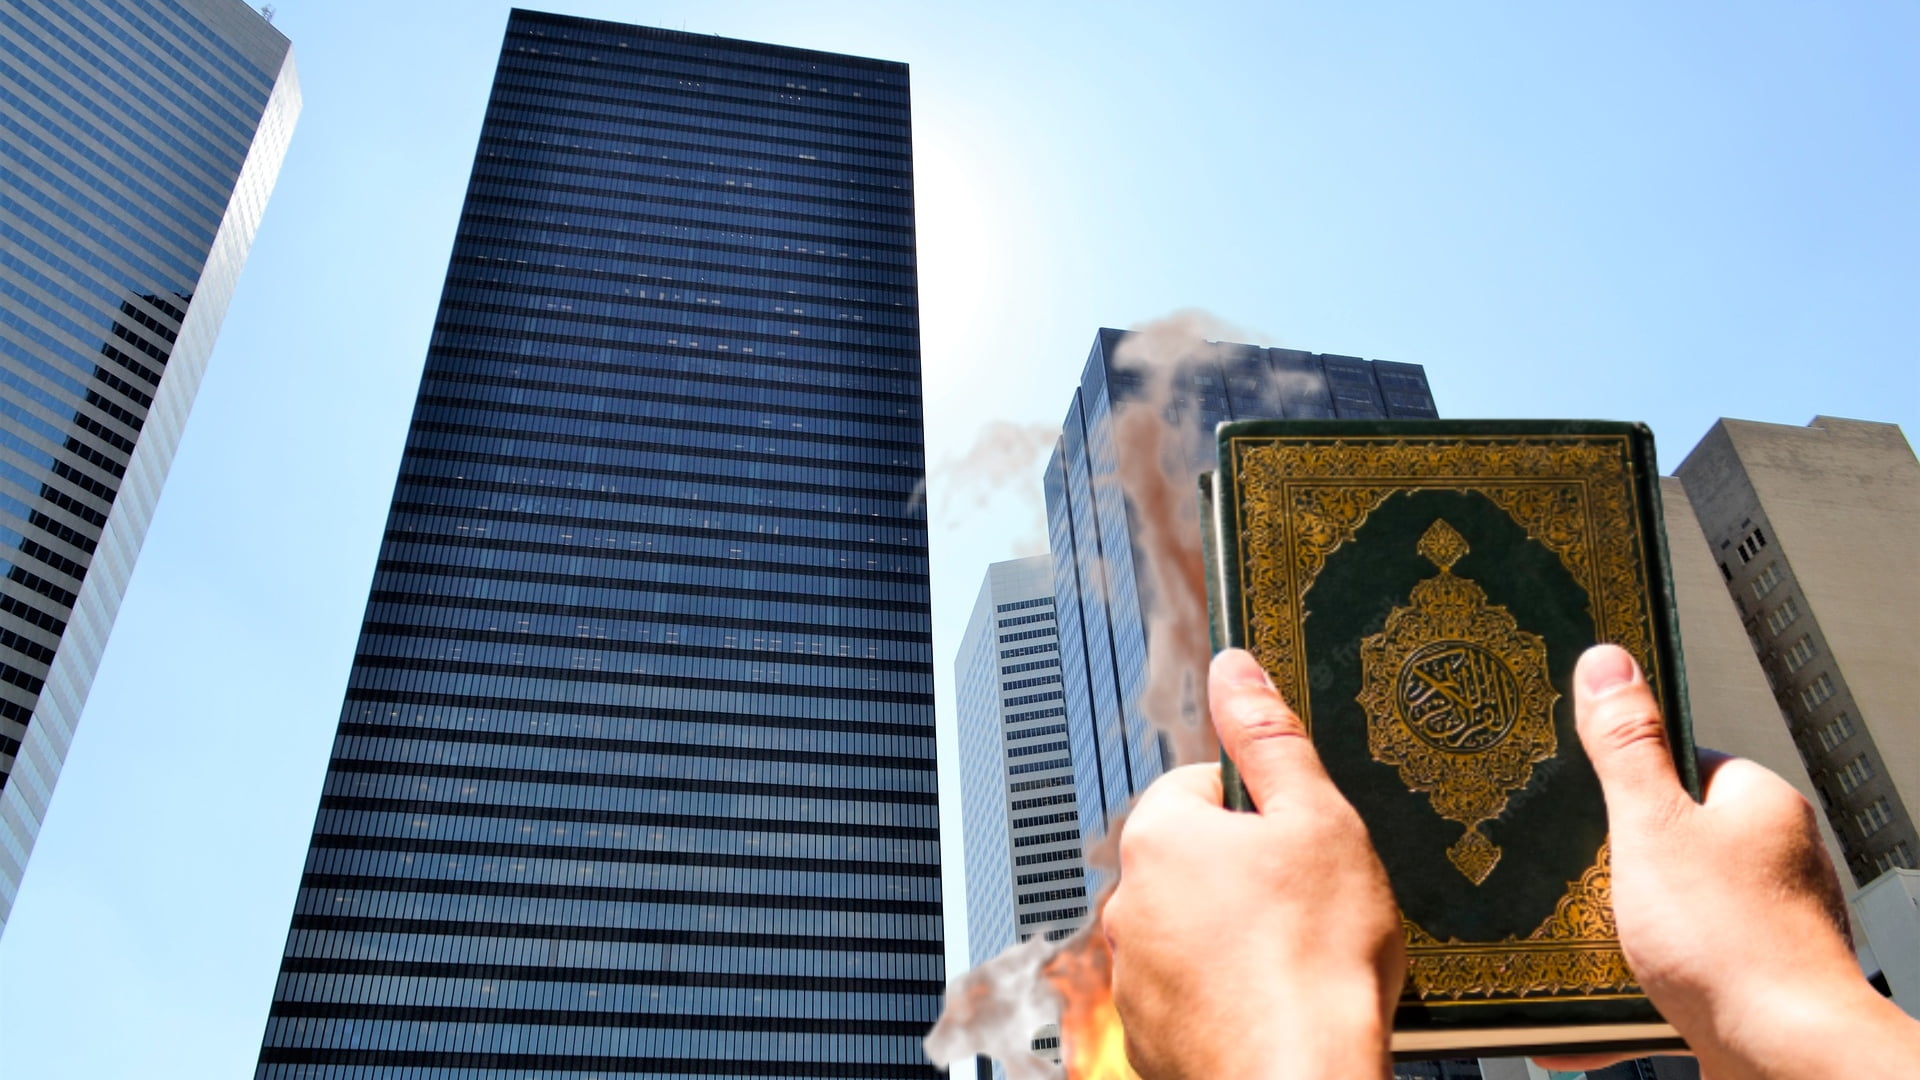 Extremists Burn Another Copy of Quran In Denmark During Ramadan